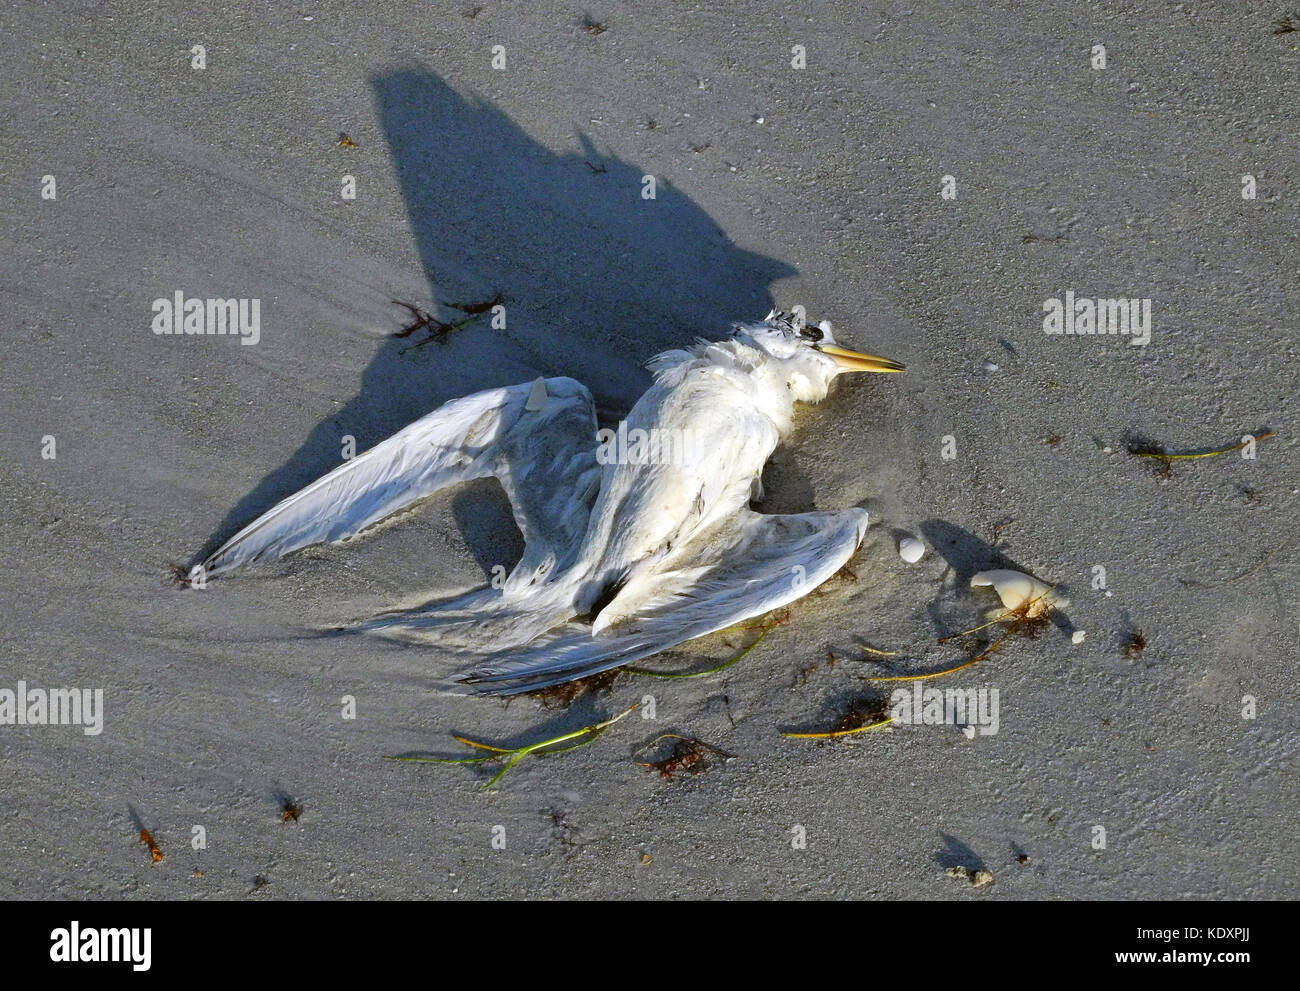 A dead Least Tern (Sternula antillarum) is washed up along the sandy Florida coast after being caught in hurricane-force winds that passed over the Gulf of Mexico. The seabird is the smallest of all North American terns. Stock Photo